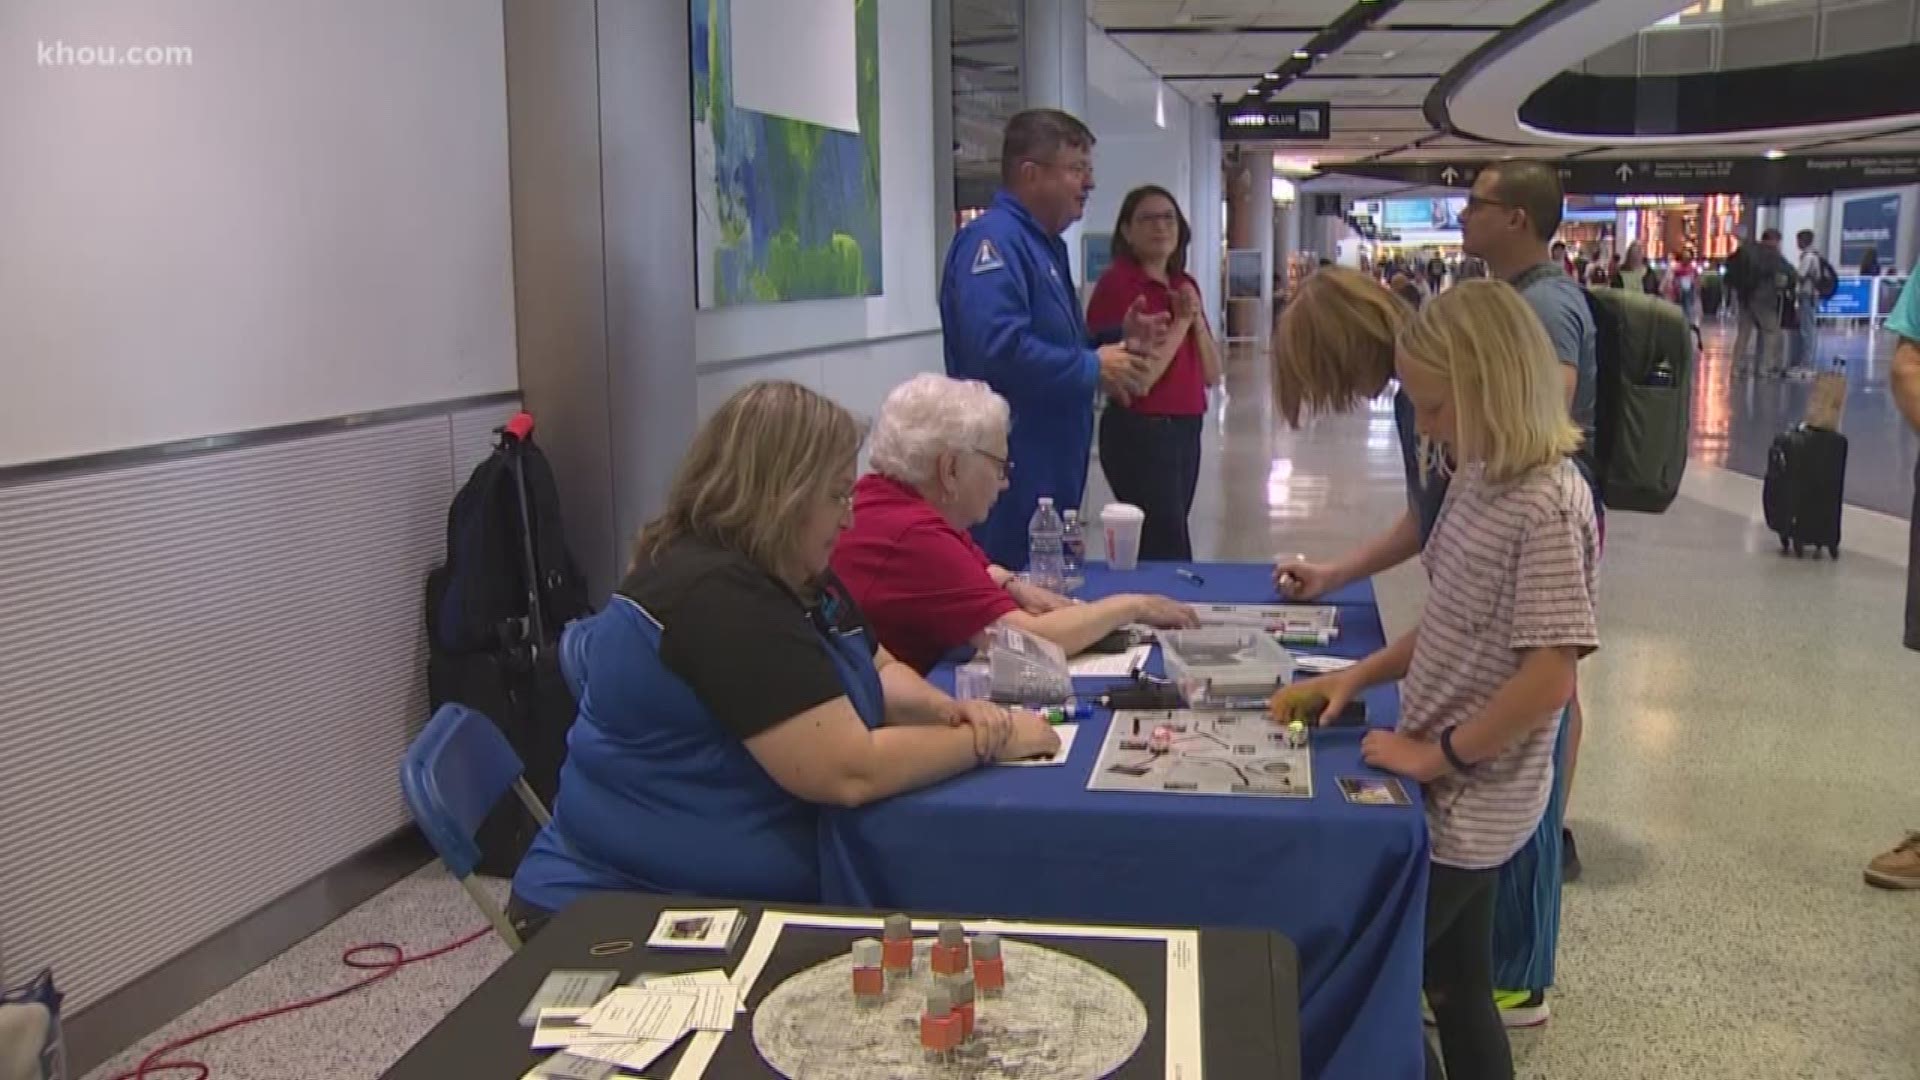 The next time you're at Bush Airport, you may just run into an astronaut! NASA is hosting science experiments in Terminal E as part of the 50th anniversary of Apollo 11.